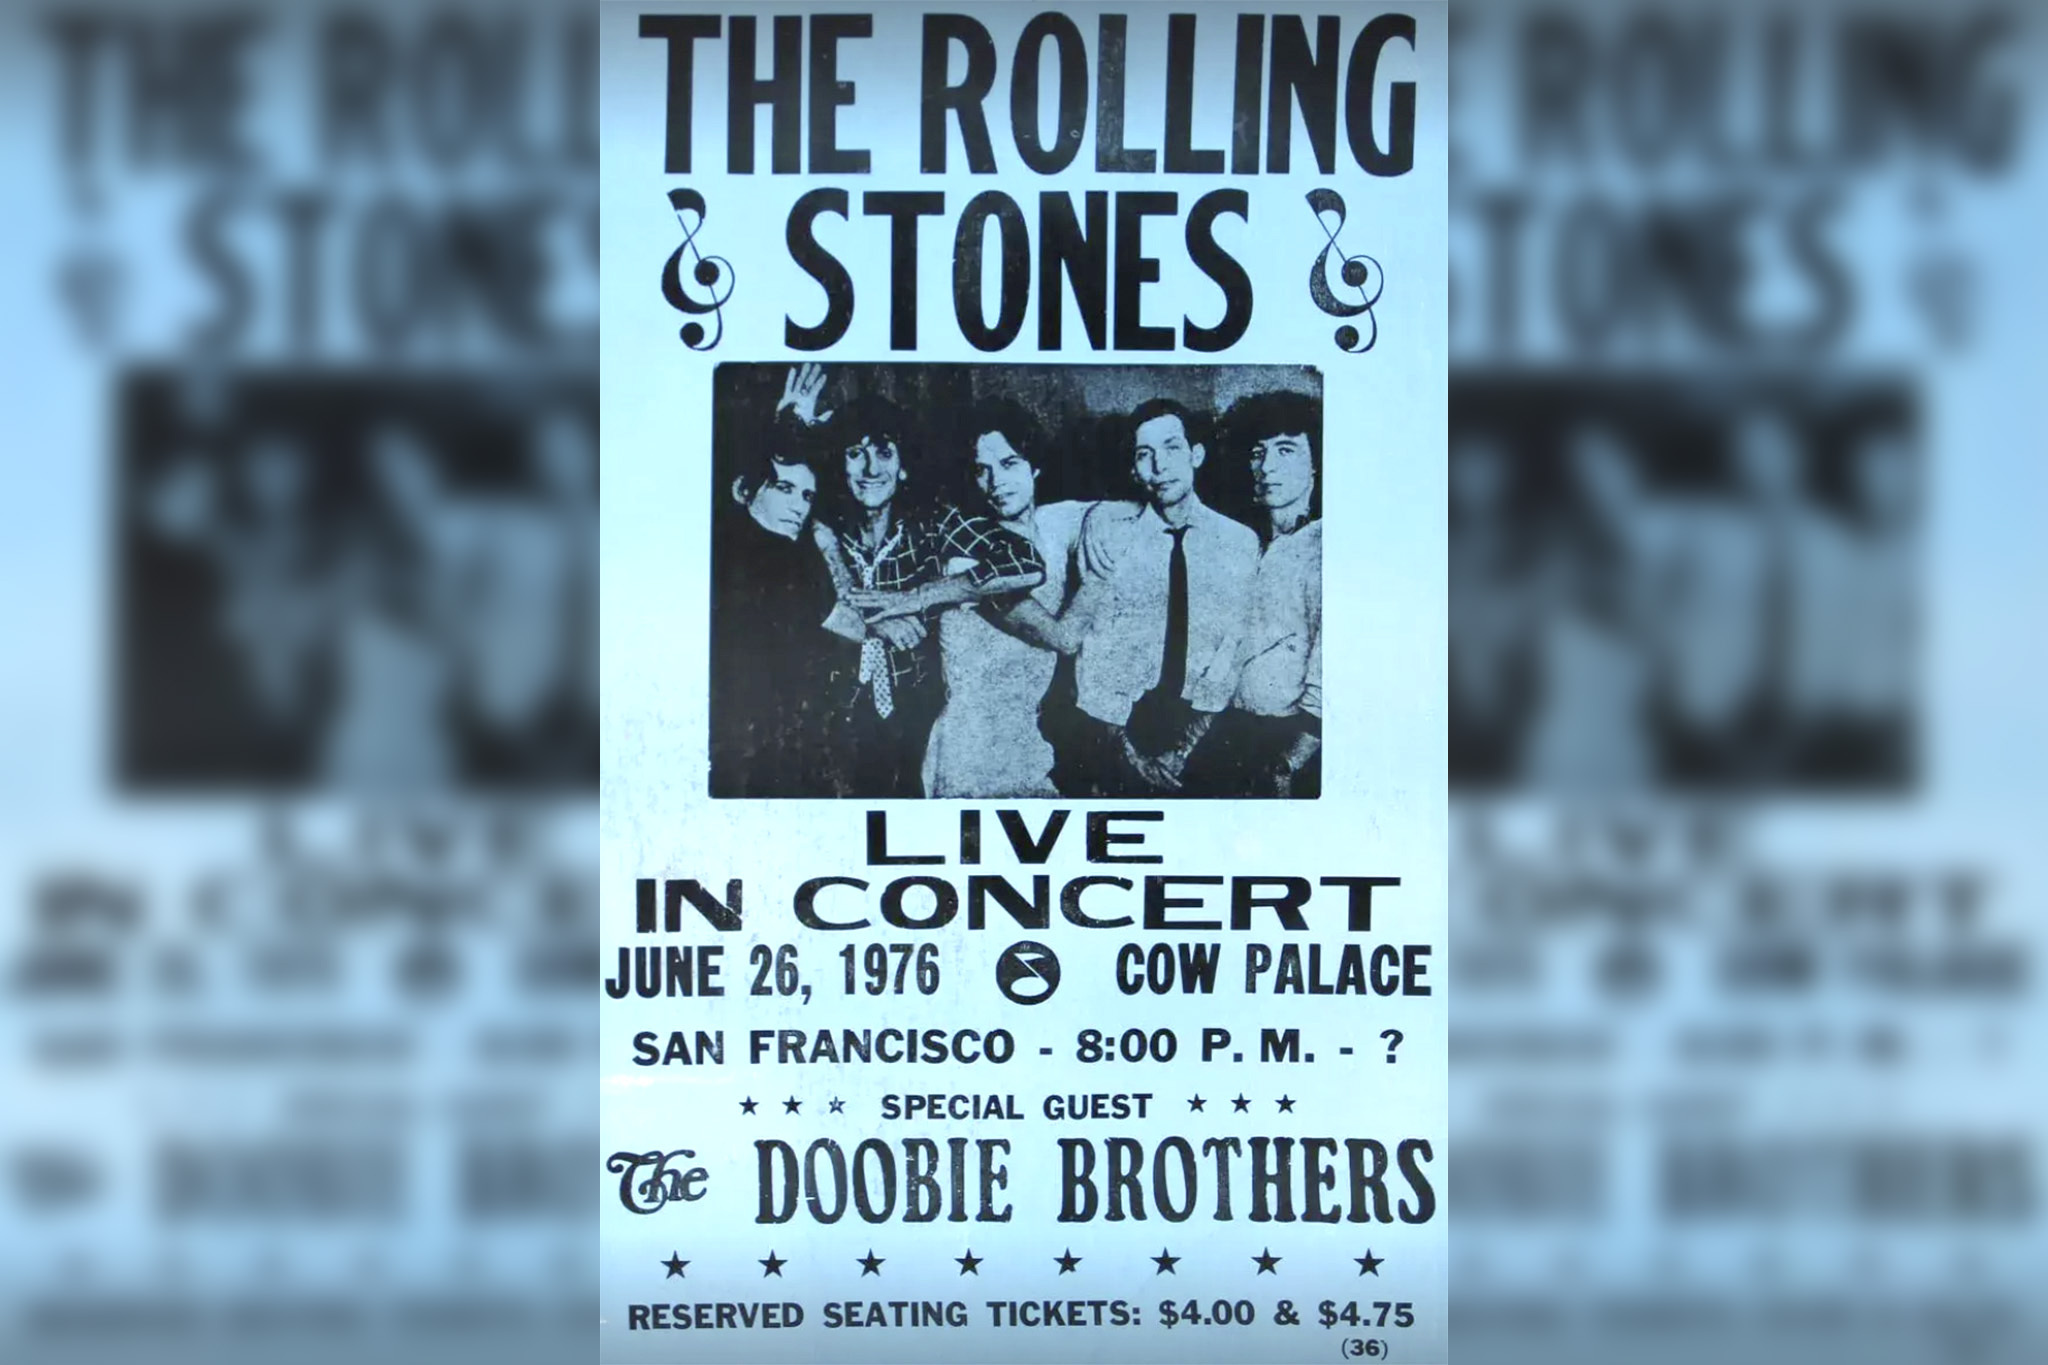 A vintage poster for a San Francisco rock show led me into a forgery underworld